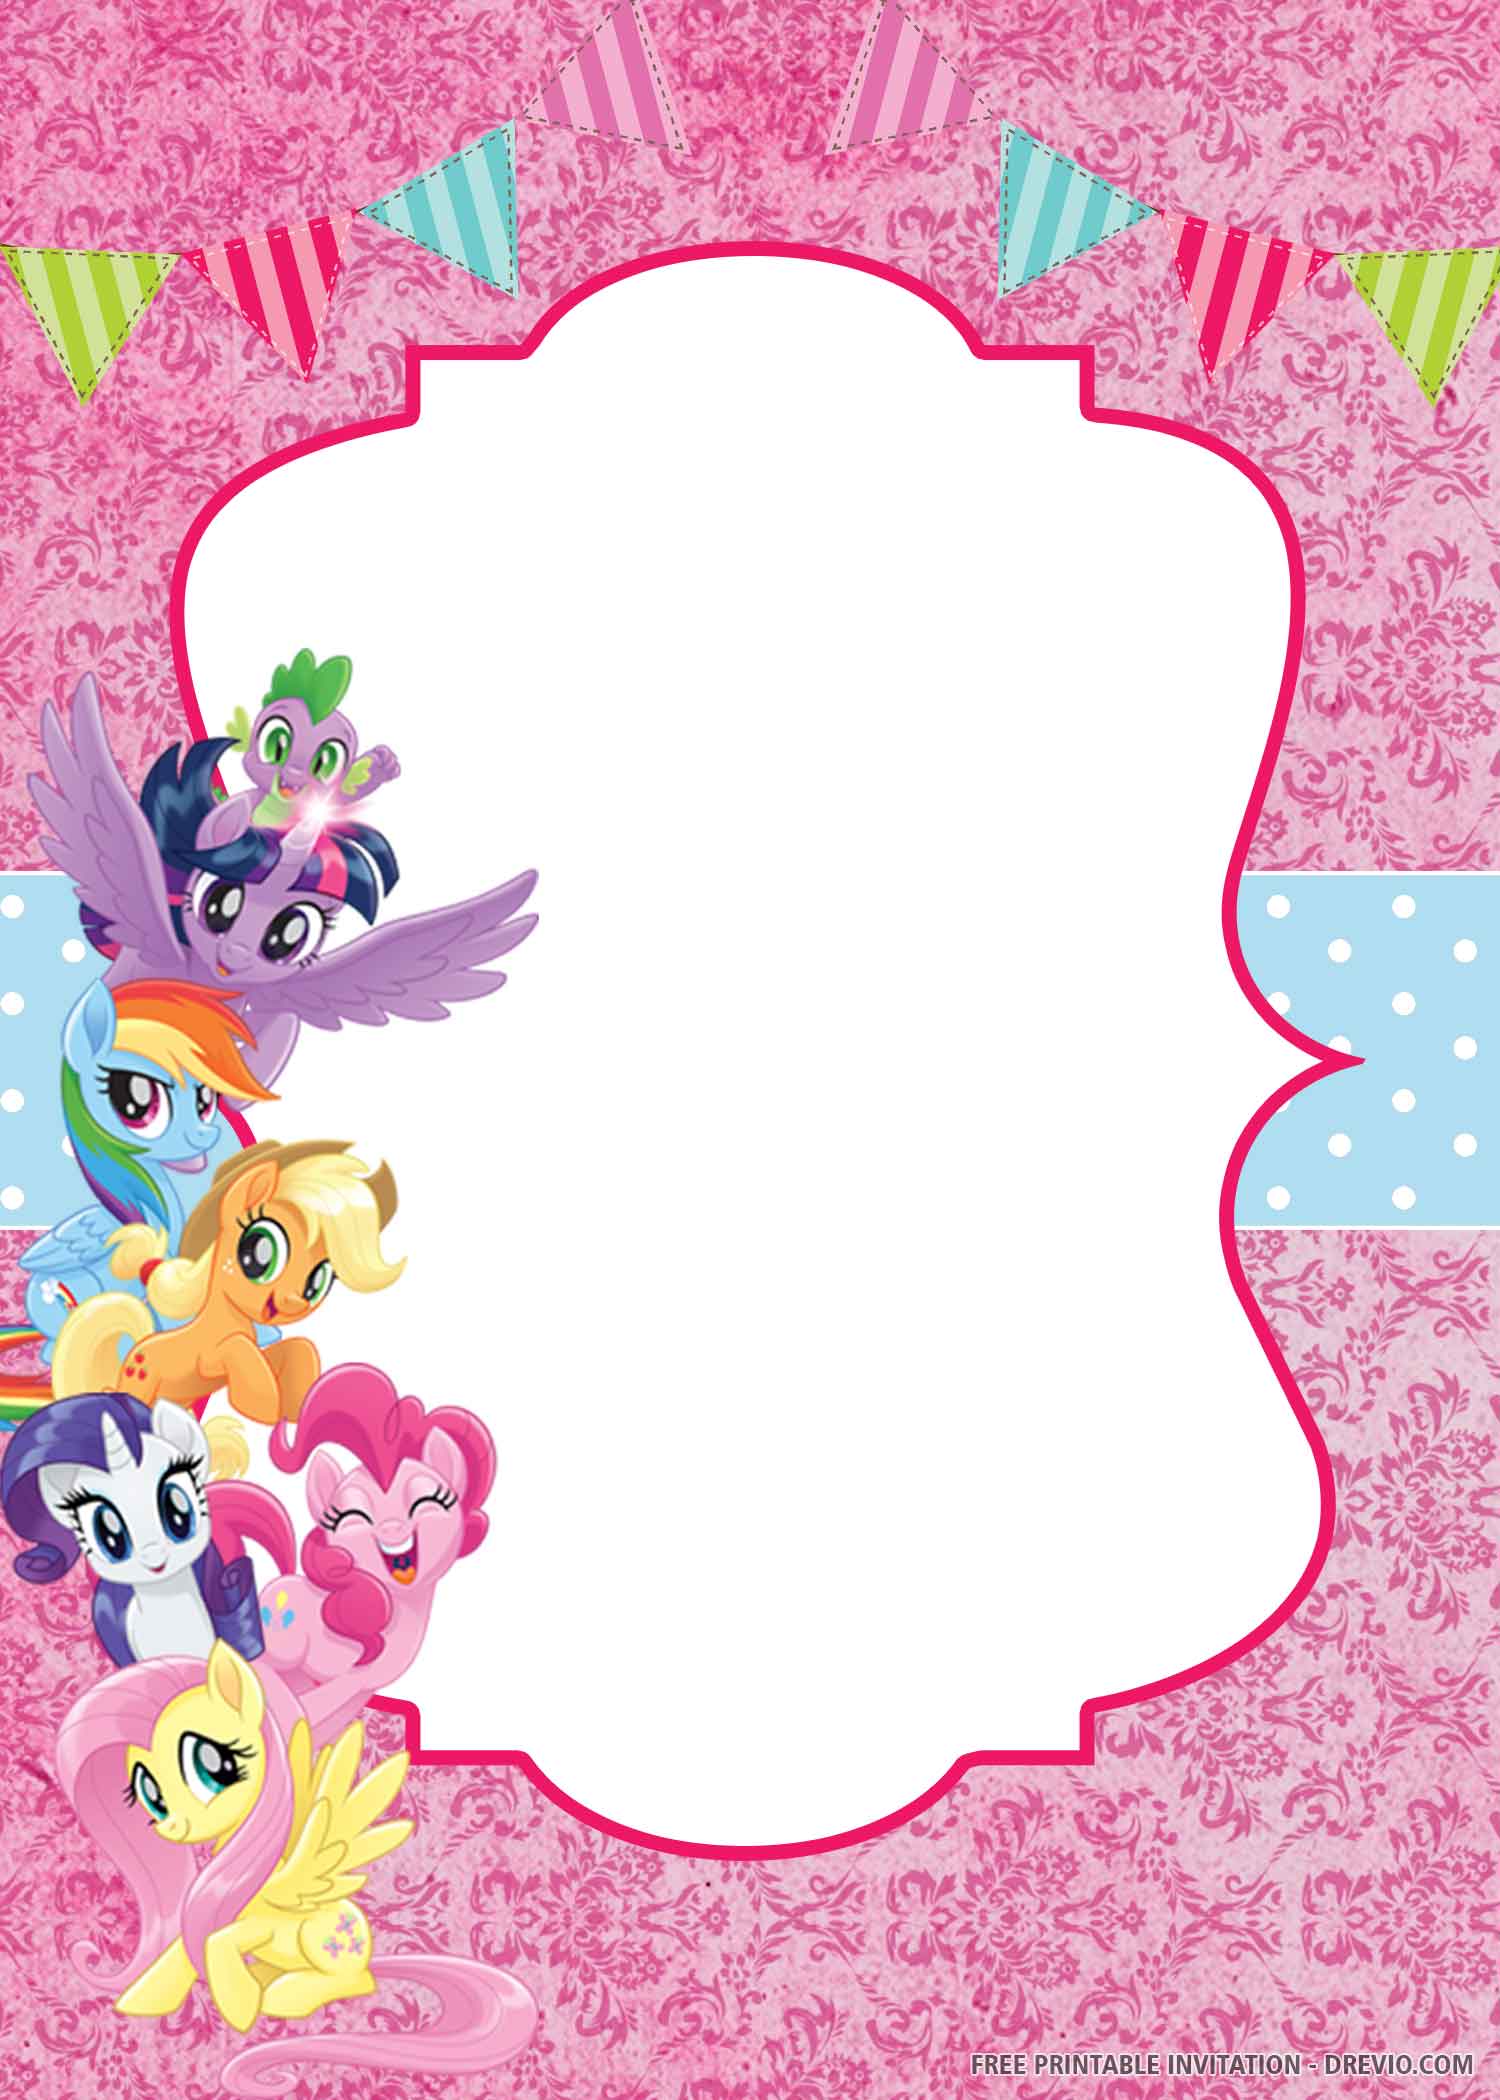 my-little-pony-template-invitations